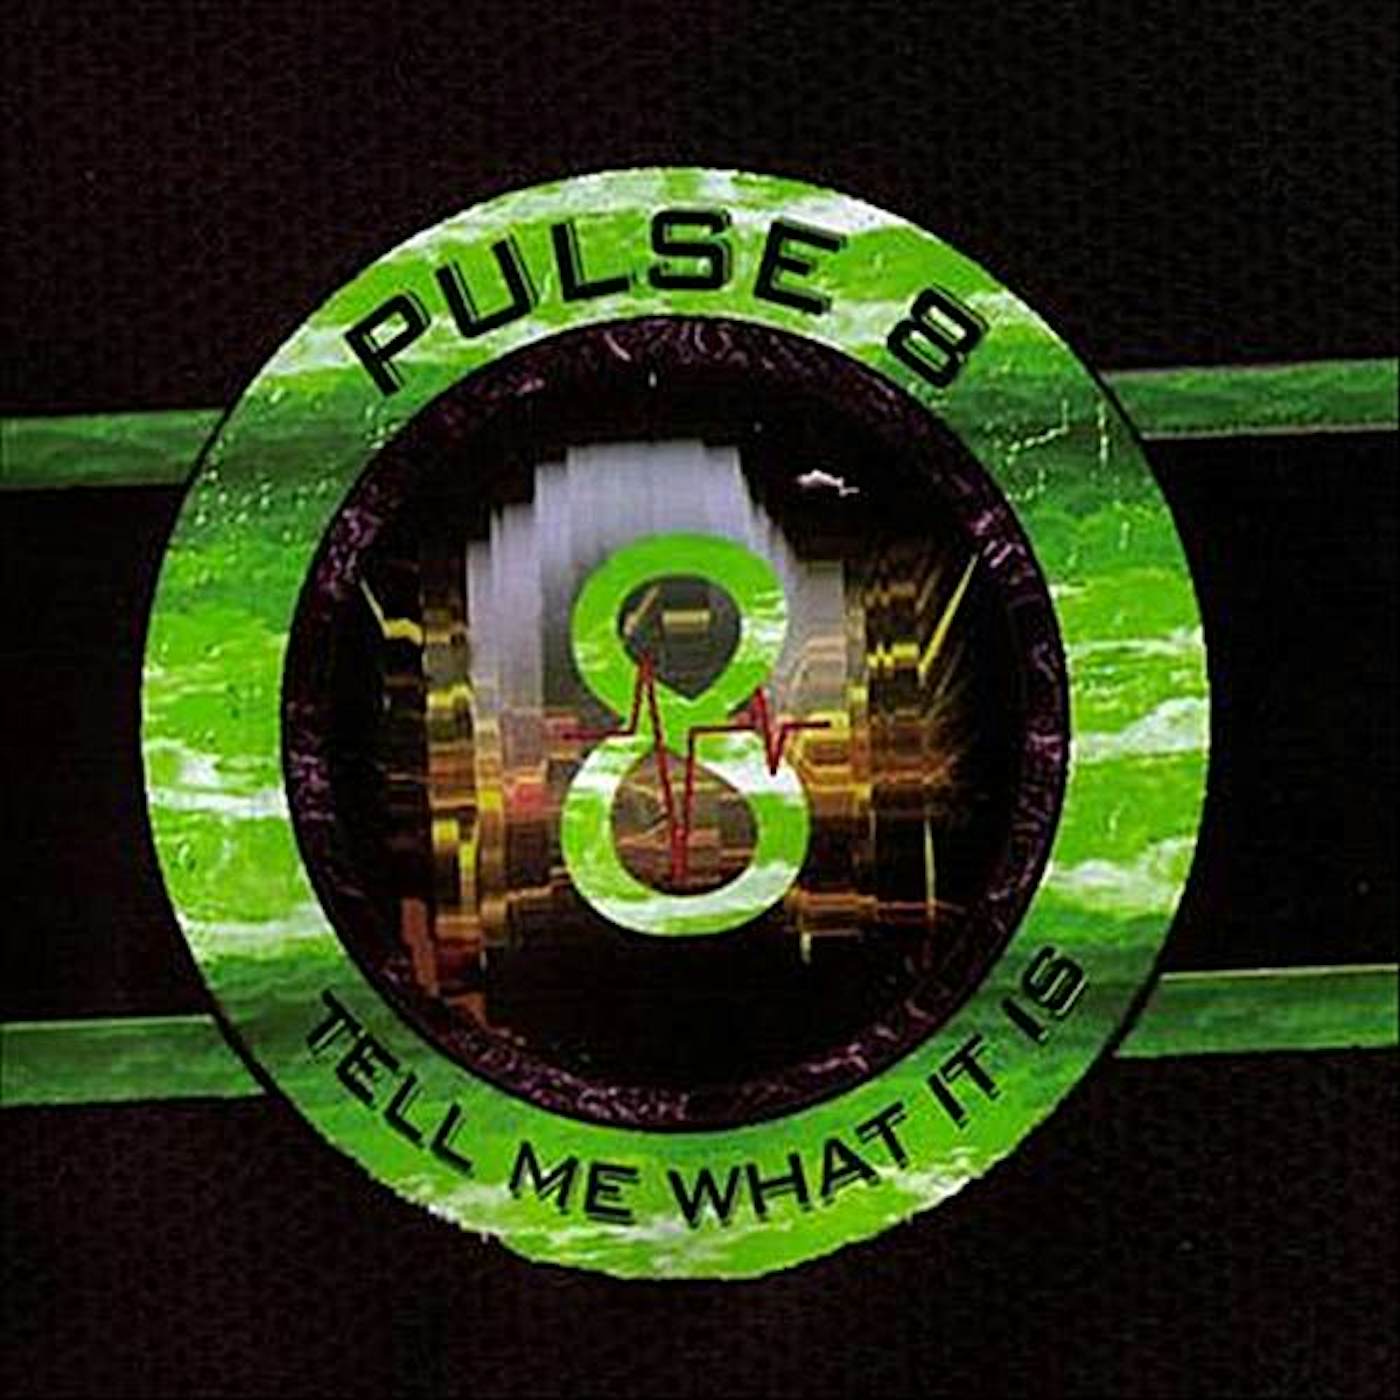 Pulse8 TELL ME WHAT IT IS CD